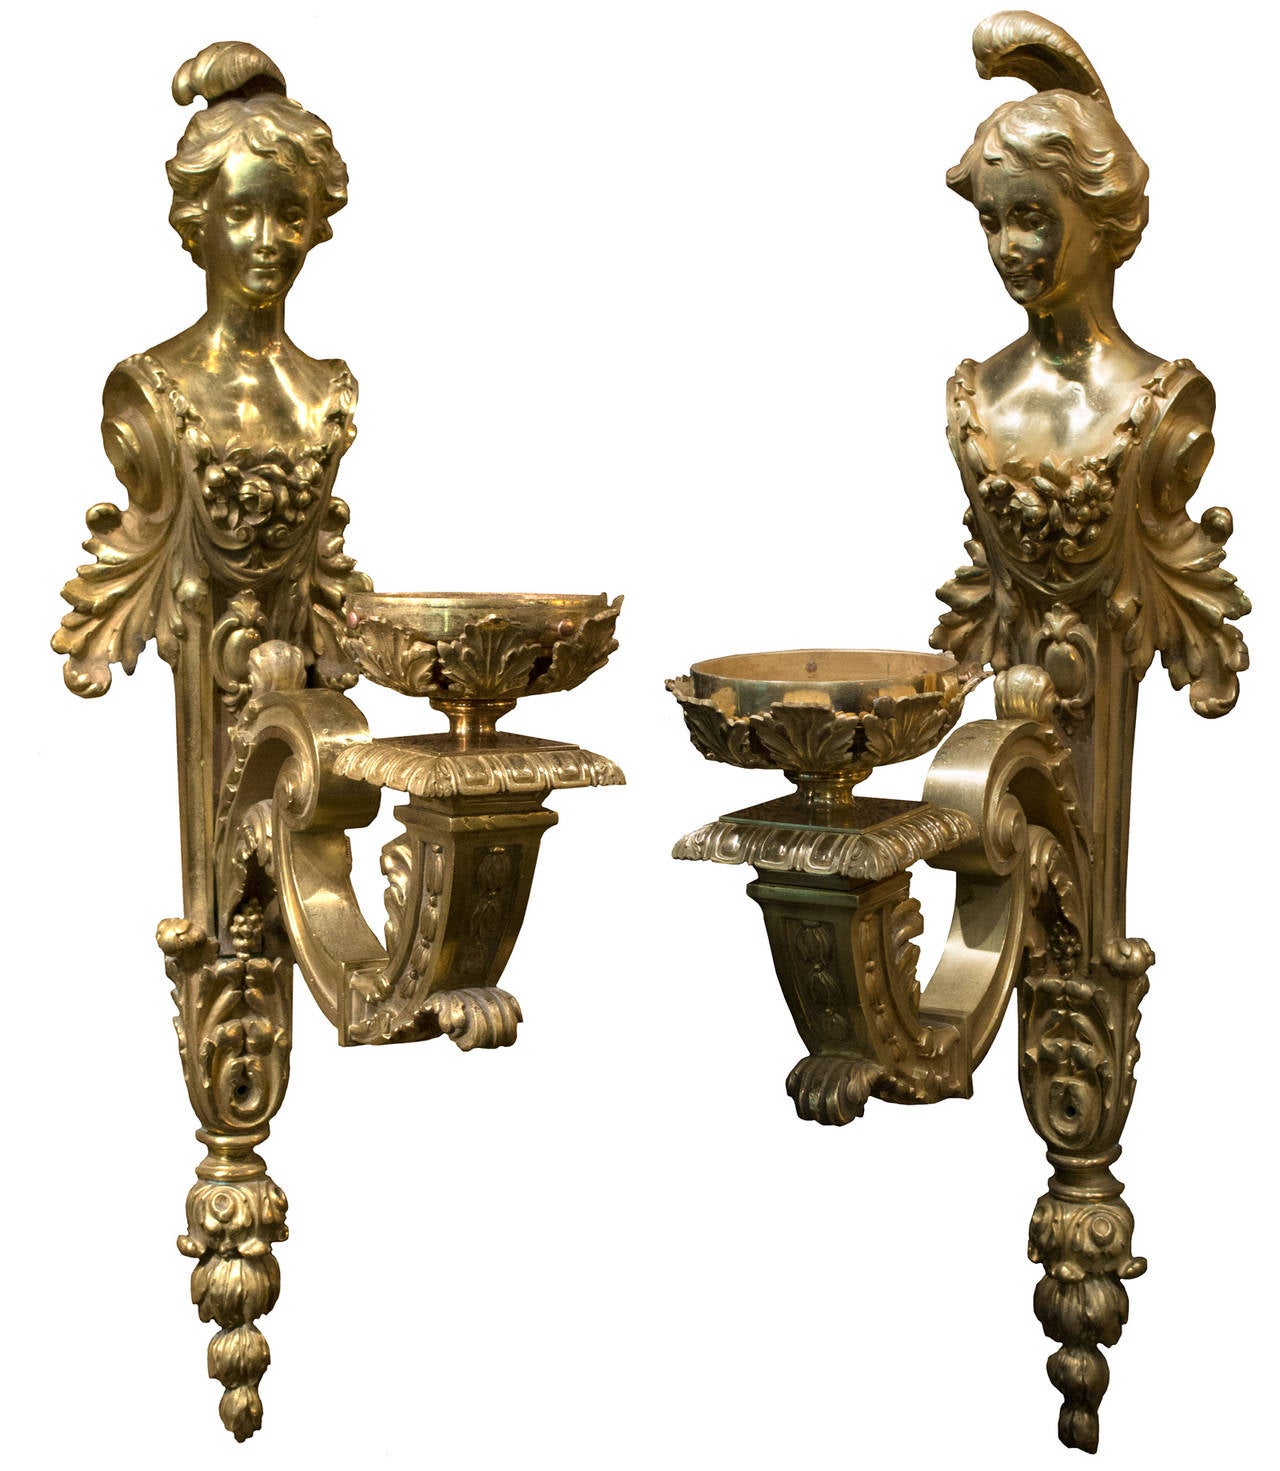 In the style of Baroque works, these two sconces feature two beautiful nineteenth-century women in seventeenth-century costume, carefully sculpted and chased. (The sconces can be wired upon request.)